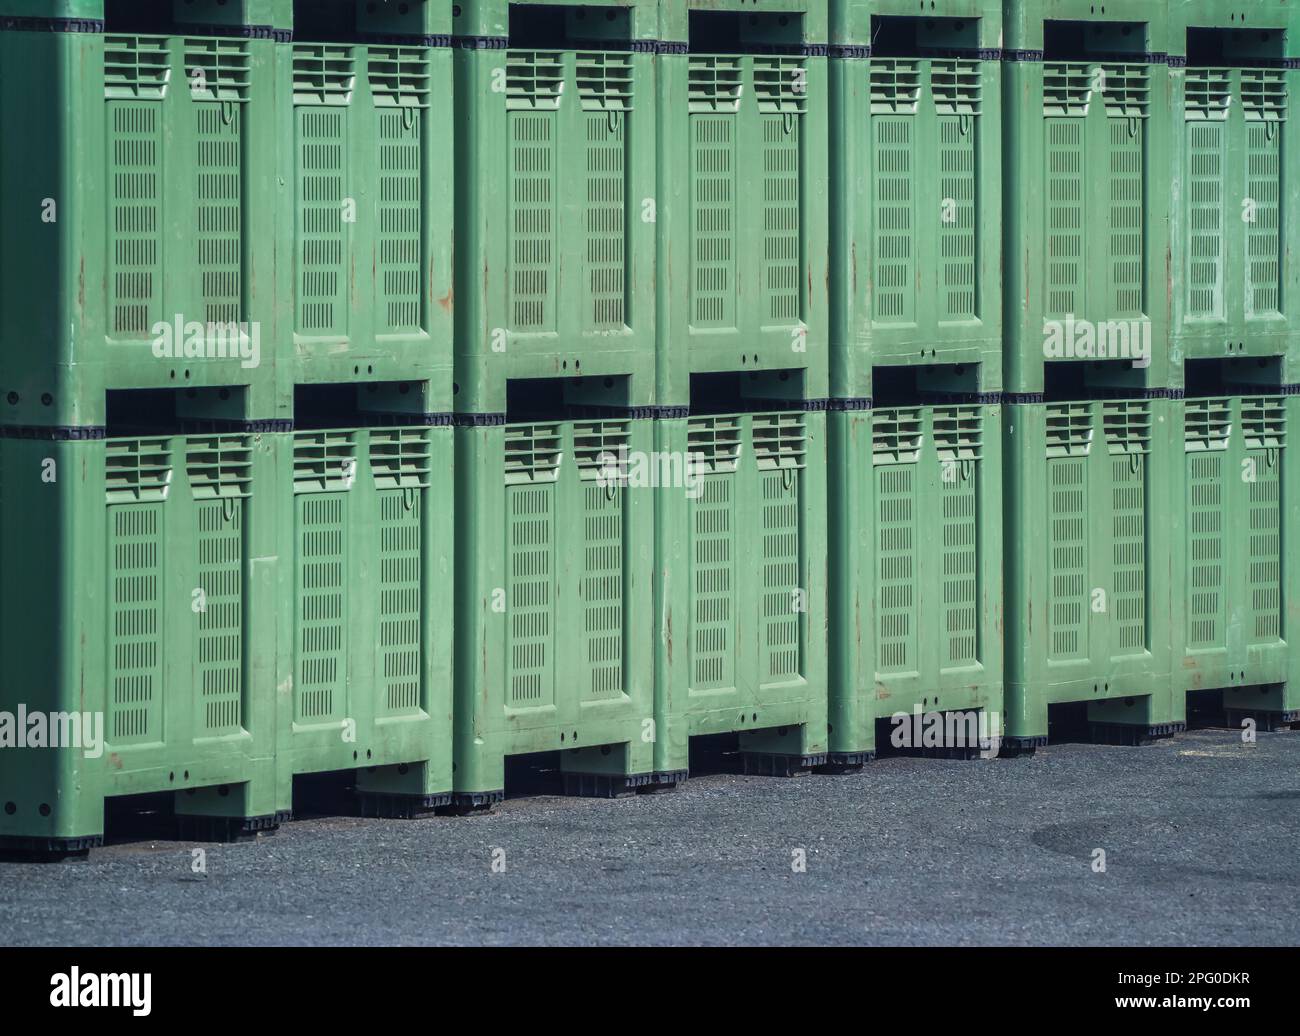 Big green plastic crates for fruits are stacked and waiting to be filled with fruits, apples, pears. Big industrial fruit crates stored outside, stack Stock Photo